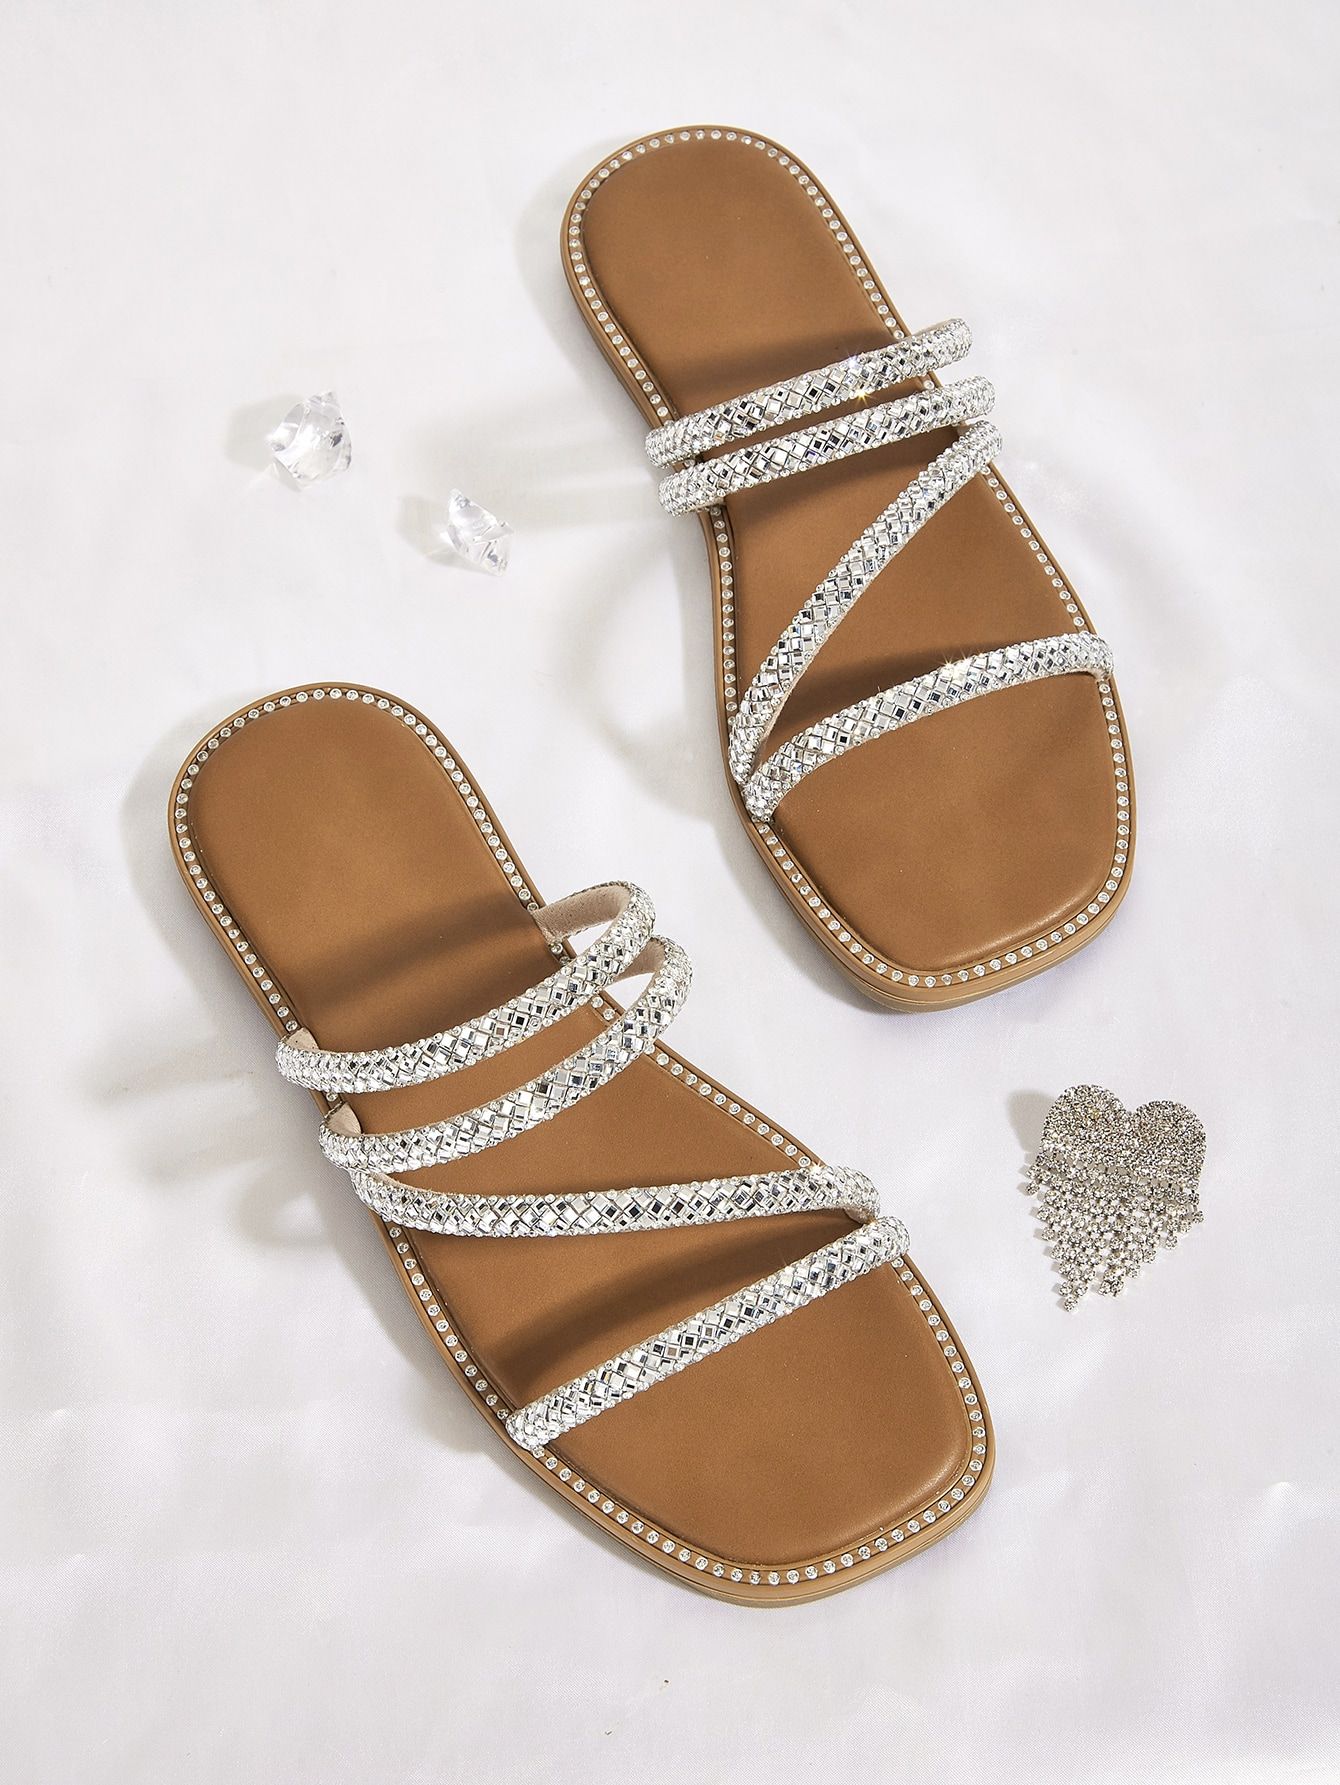 How to Wear Silver Sandals: Top 15 Shiny & Attractive Outfit Ideas for Women